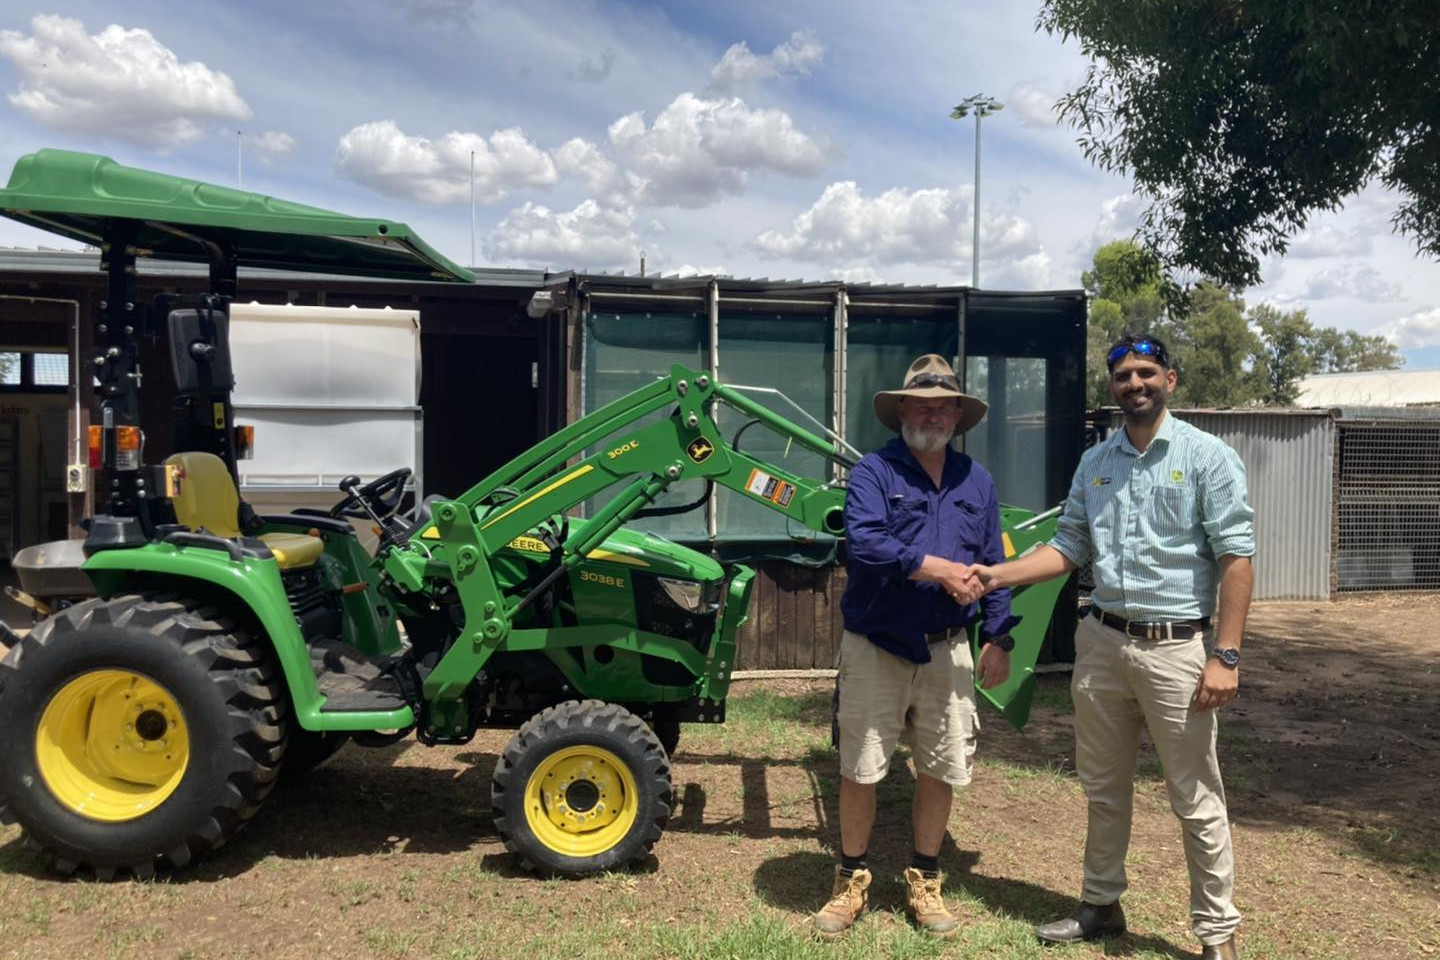 Gilgandra High School is excited to have received the new tractor and equipment. Photo supplied.